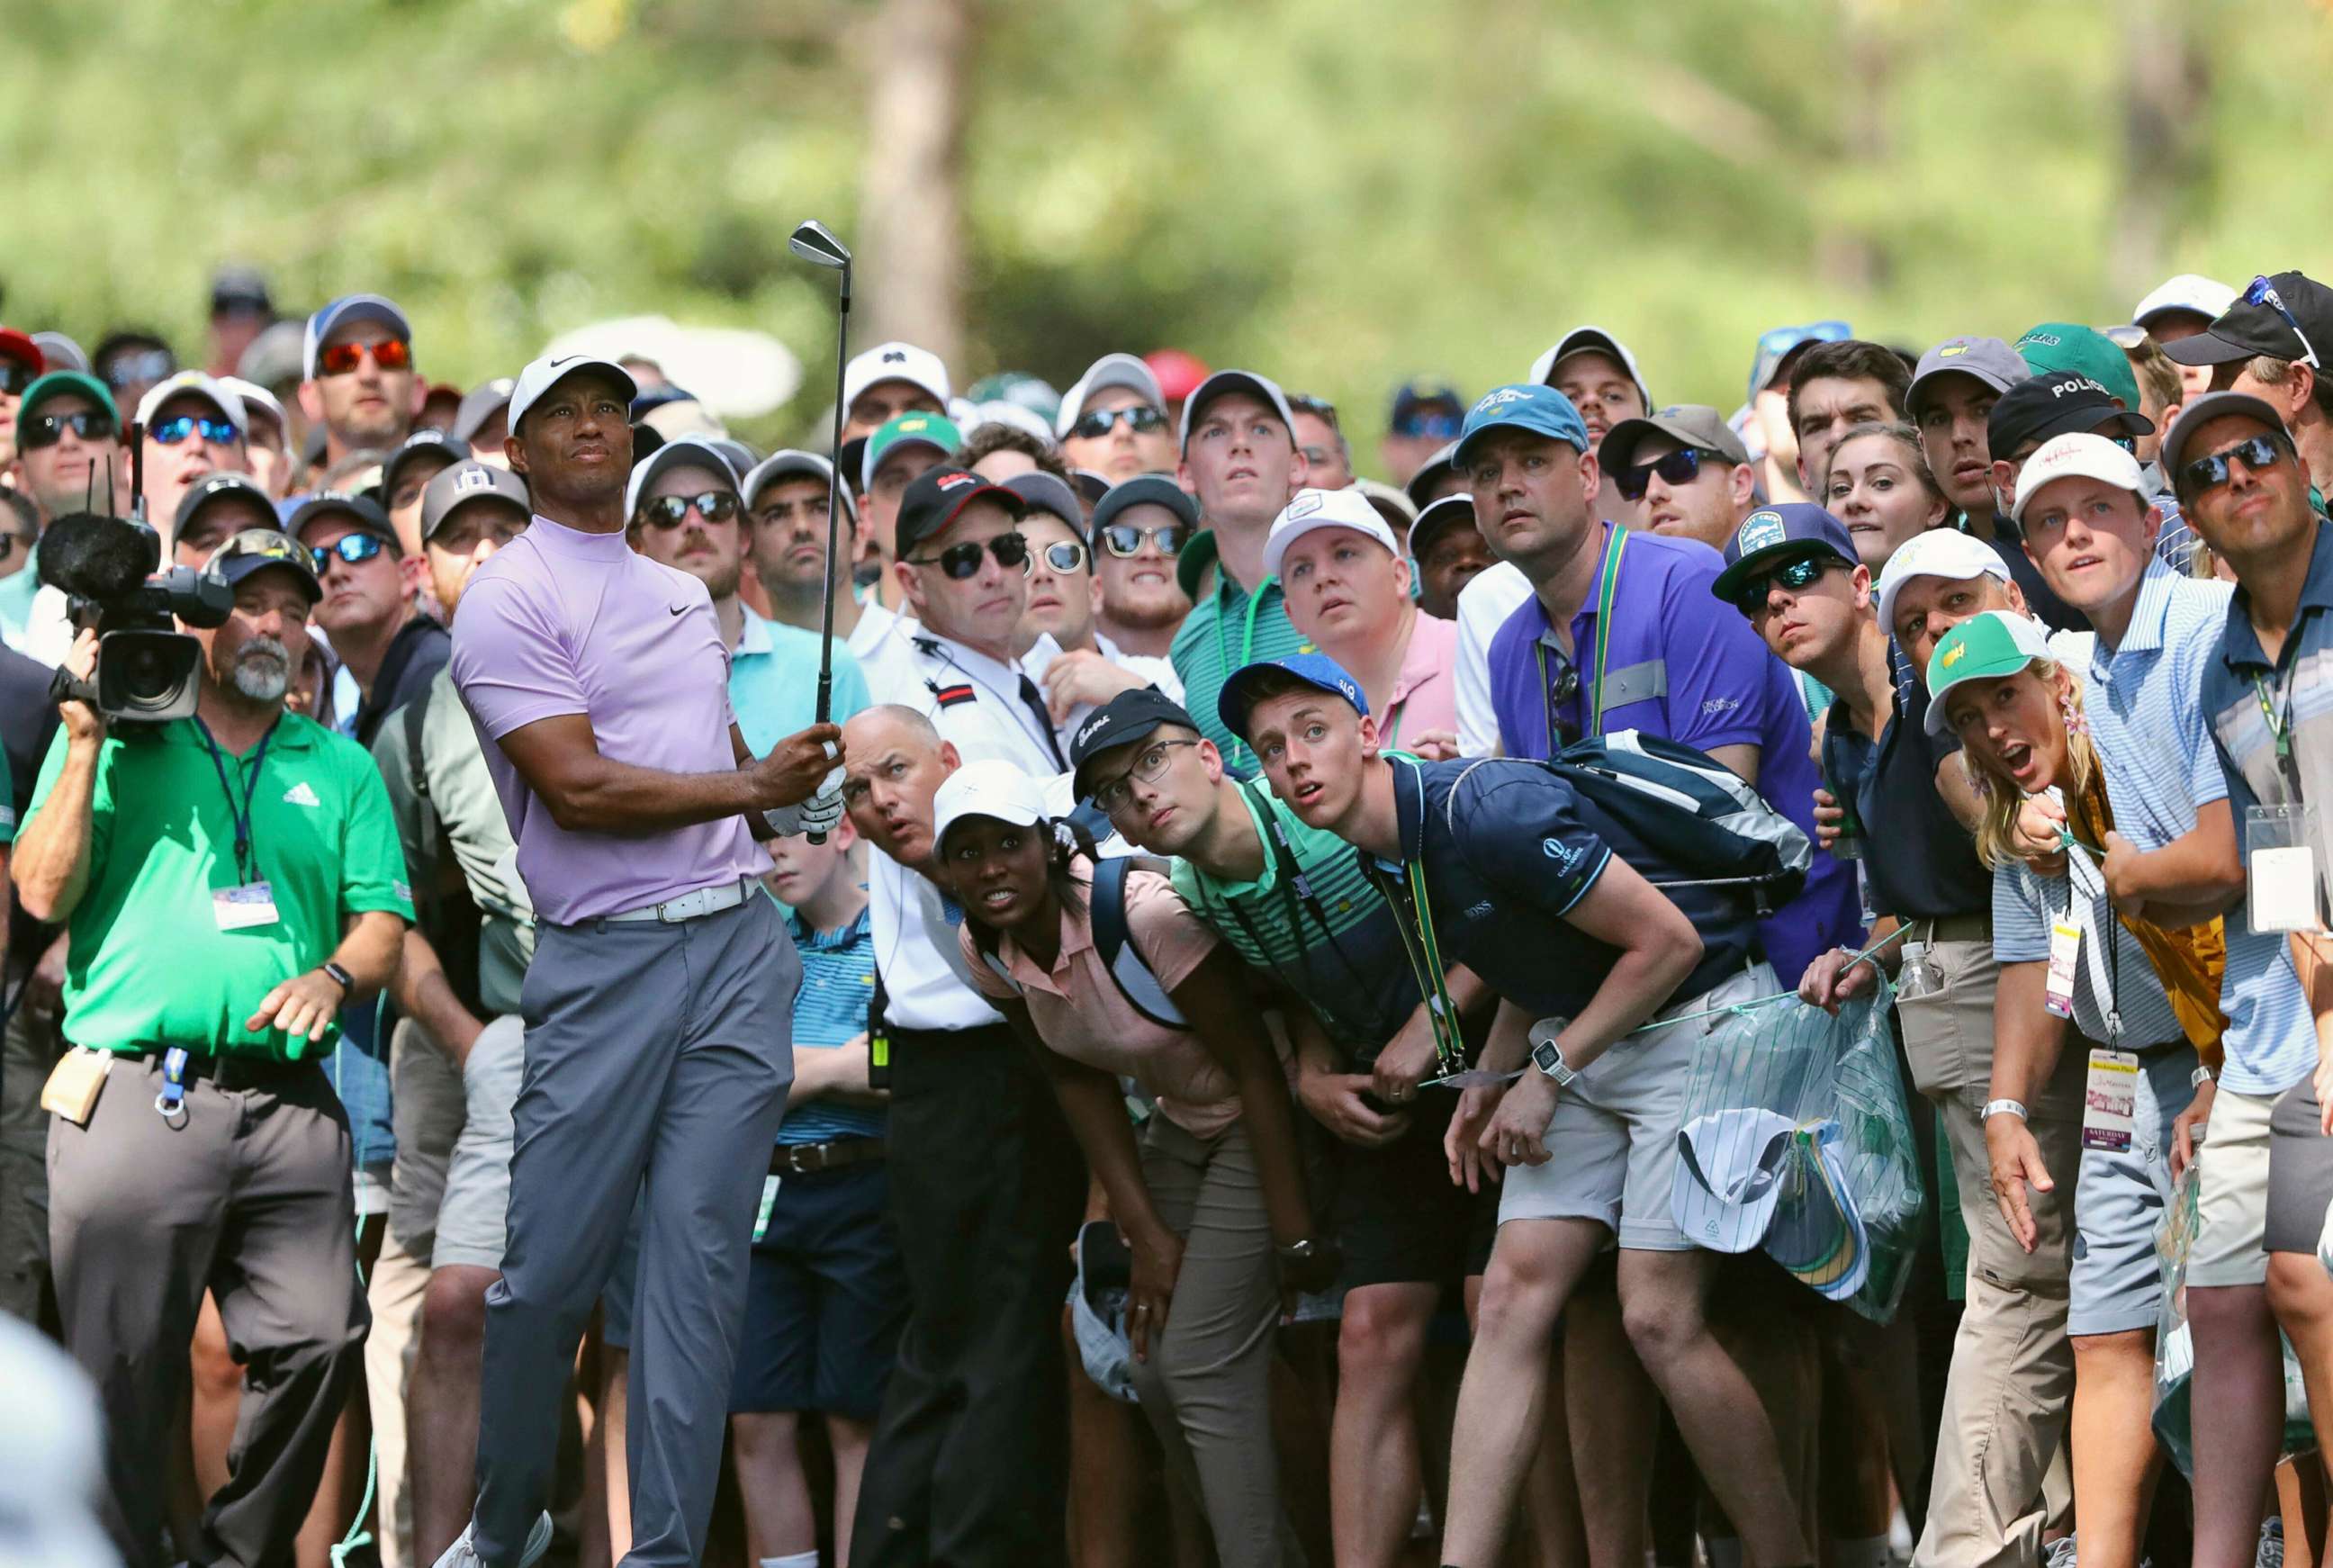 PHOTO: In this April 13, 2019, file photo, Tiger Woods hits from the gallery along the 11th fairway during the third round of the Masters golf tournament at Augusta National in Augusta, Ga.